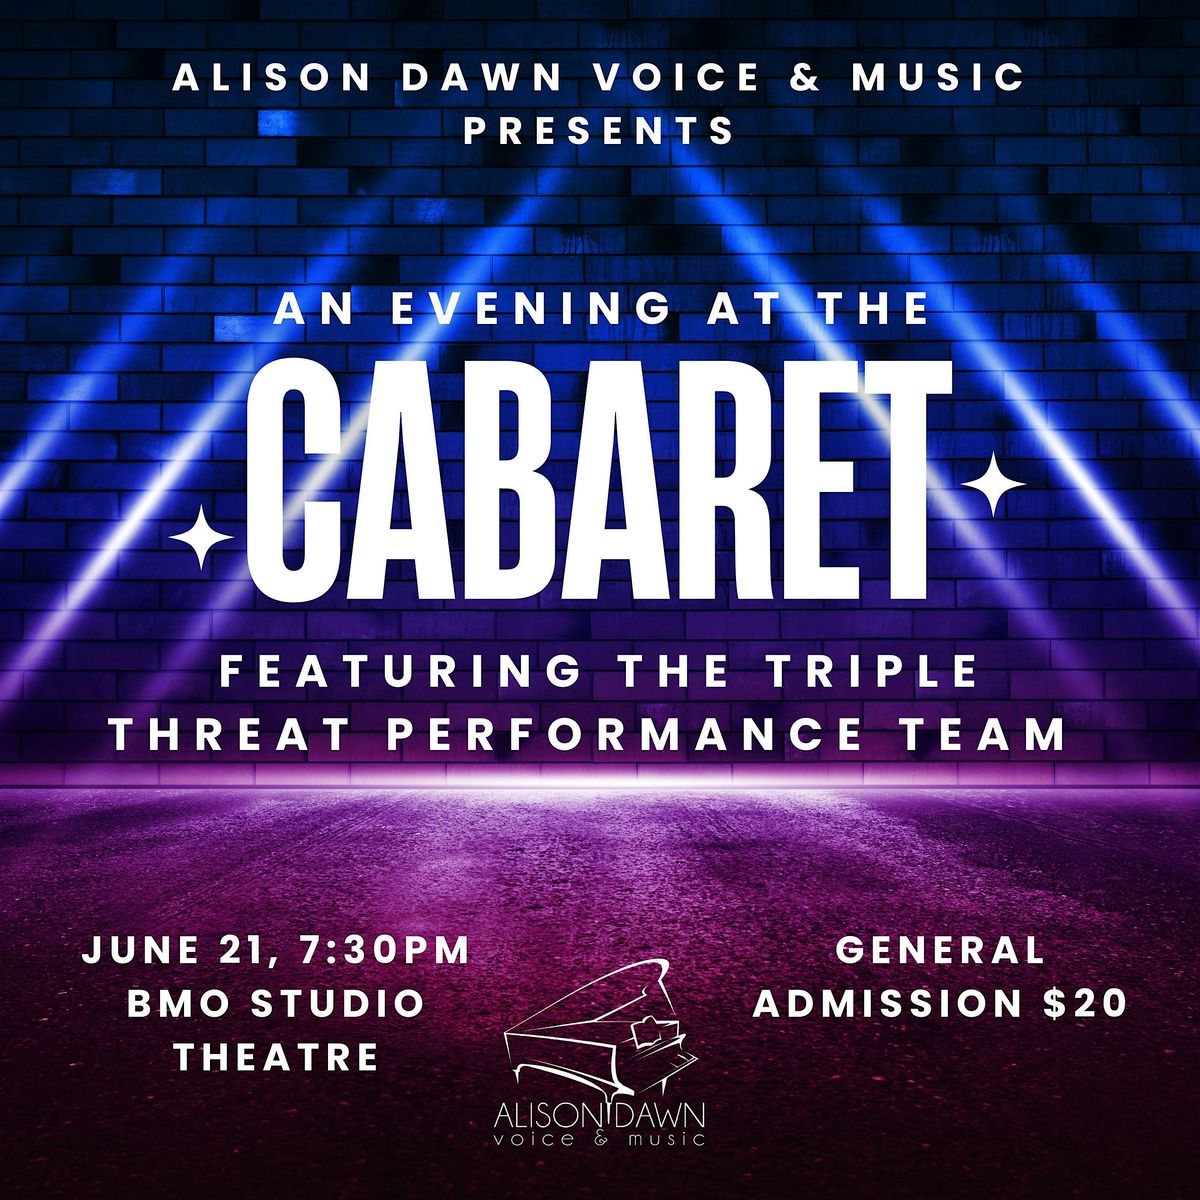 An Evening at the Cabaret featuring the Triple Threat Performance Team